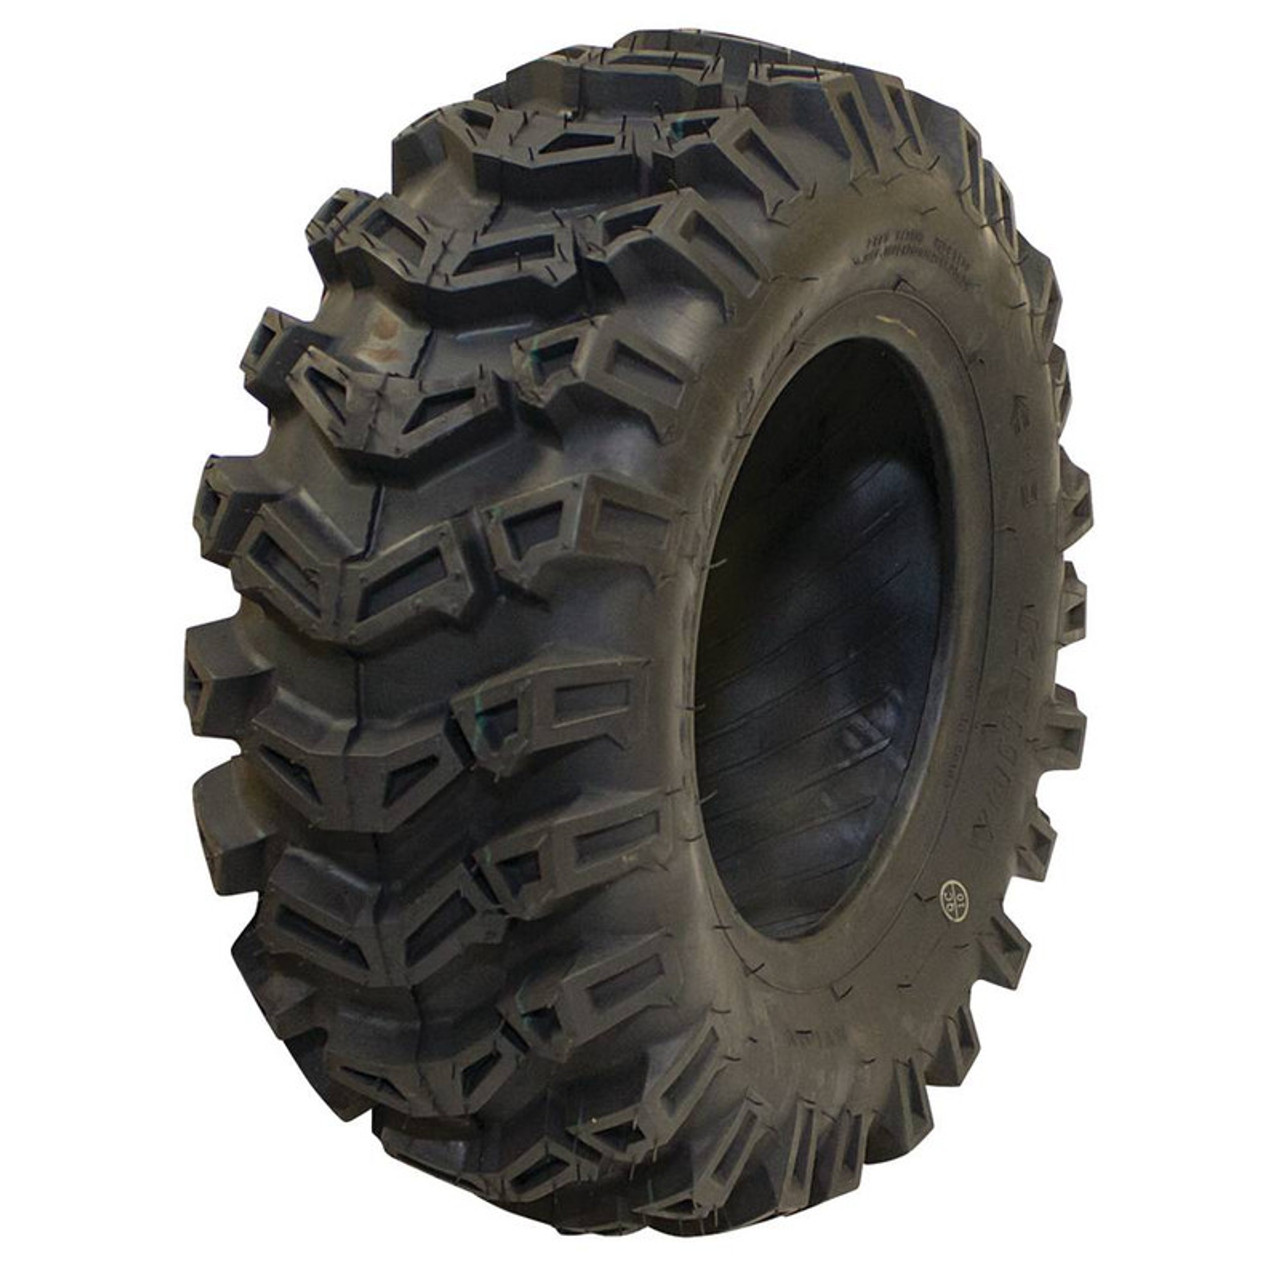 Tire 16x6.50-8 for White Outdoor 734-1525 Snowblower 2 Ply